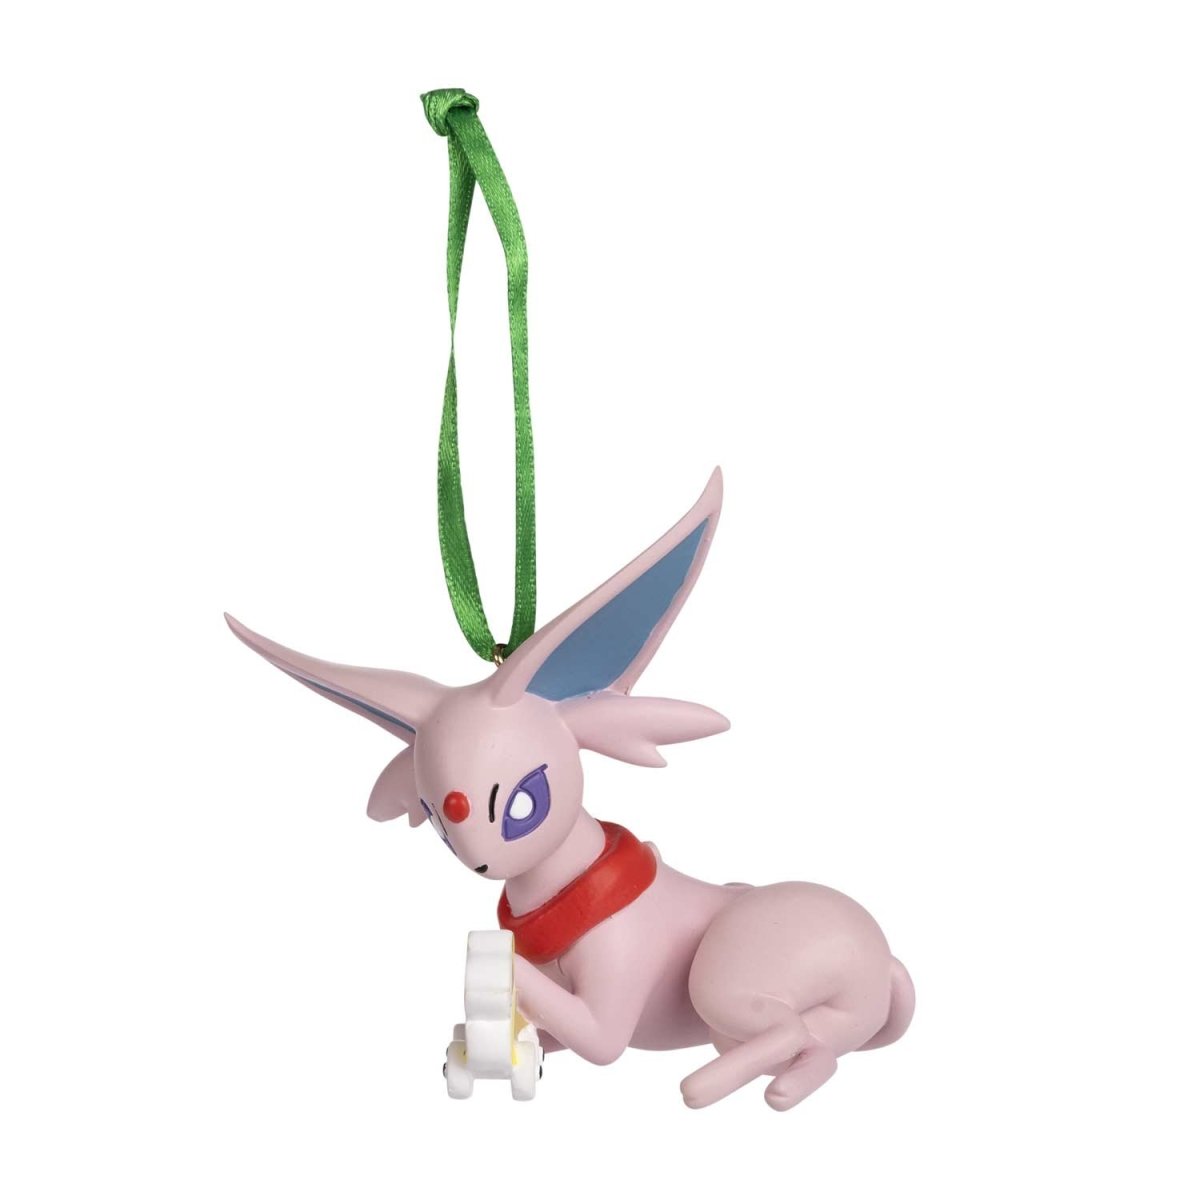 Umbreon Espeon Eevee Evolution Pokemon Love You To The Moon And Back  Personalized 2023 Holiday Merry Christmas Decorations Ornament - Mugteeco